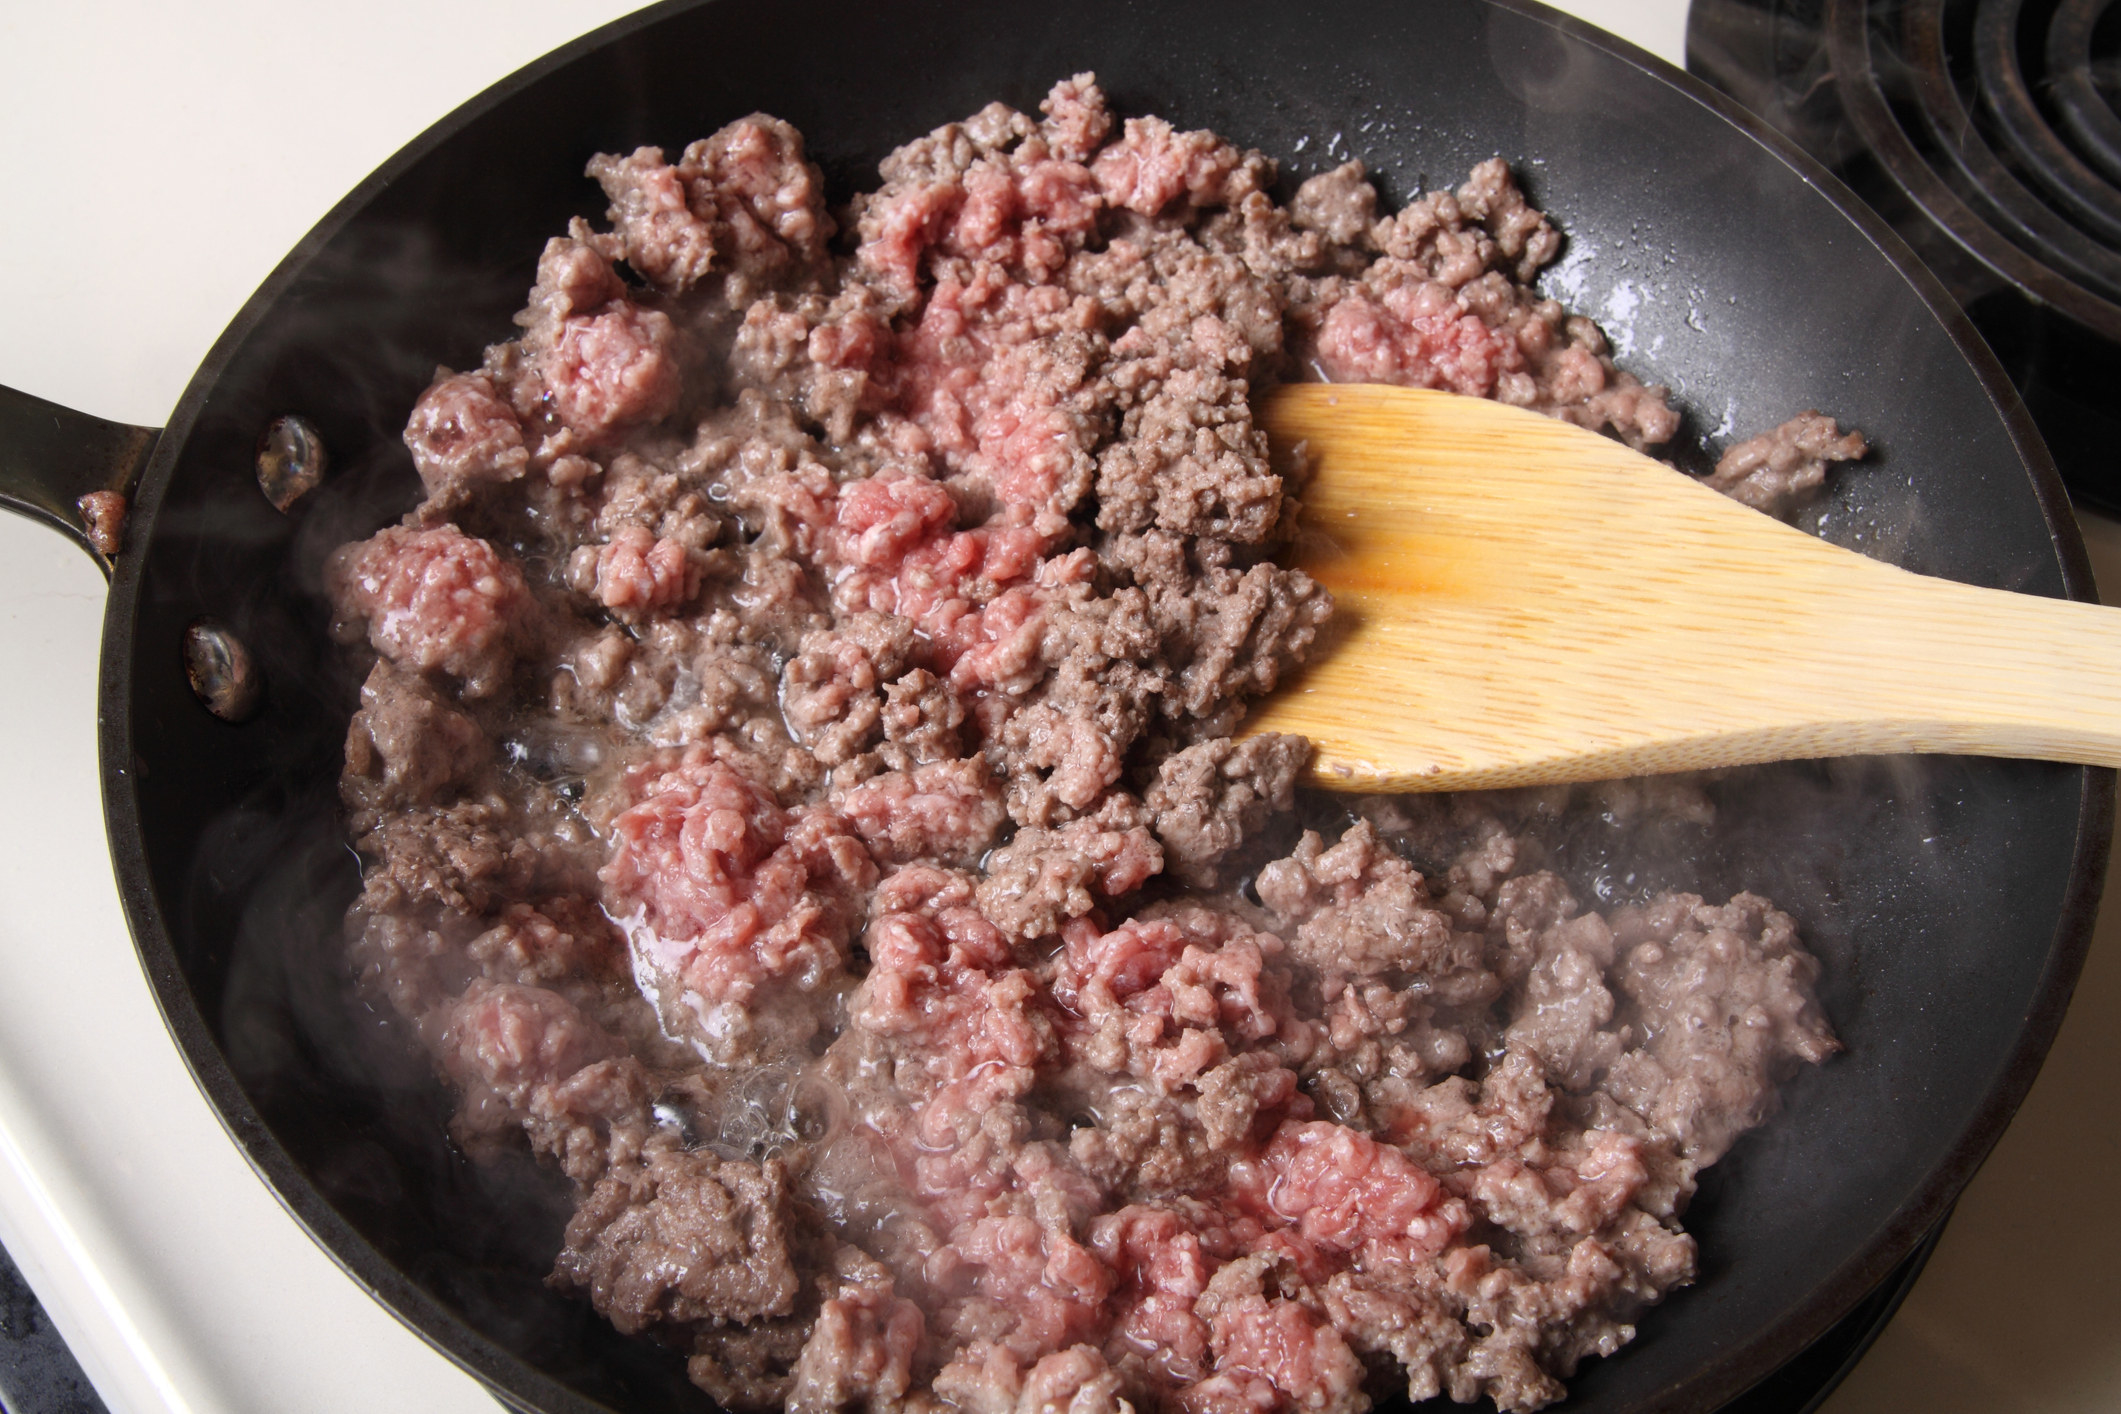 Ground meat in a hot pan